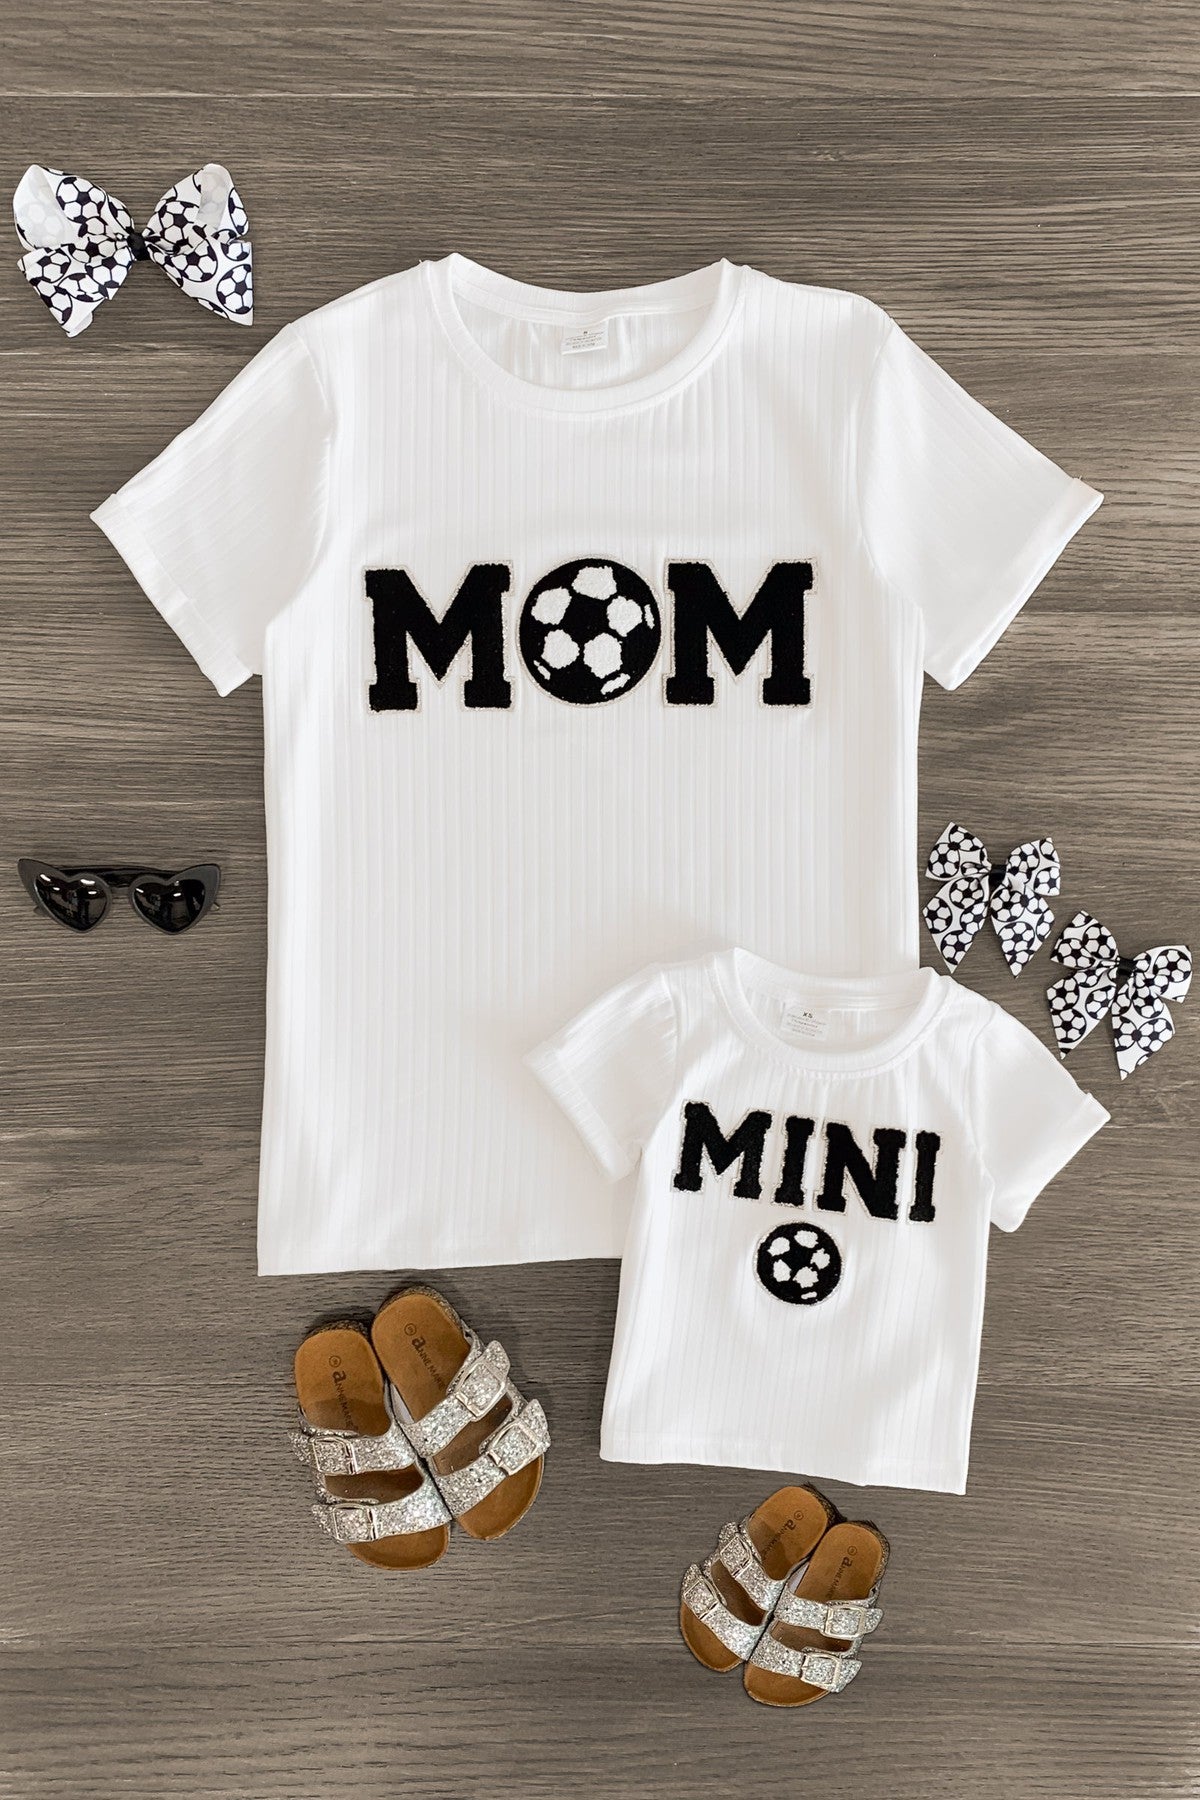 Mom & Me - "Mom & Mini" Soccer Chenille Patch Top - Sparkle in Pink